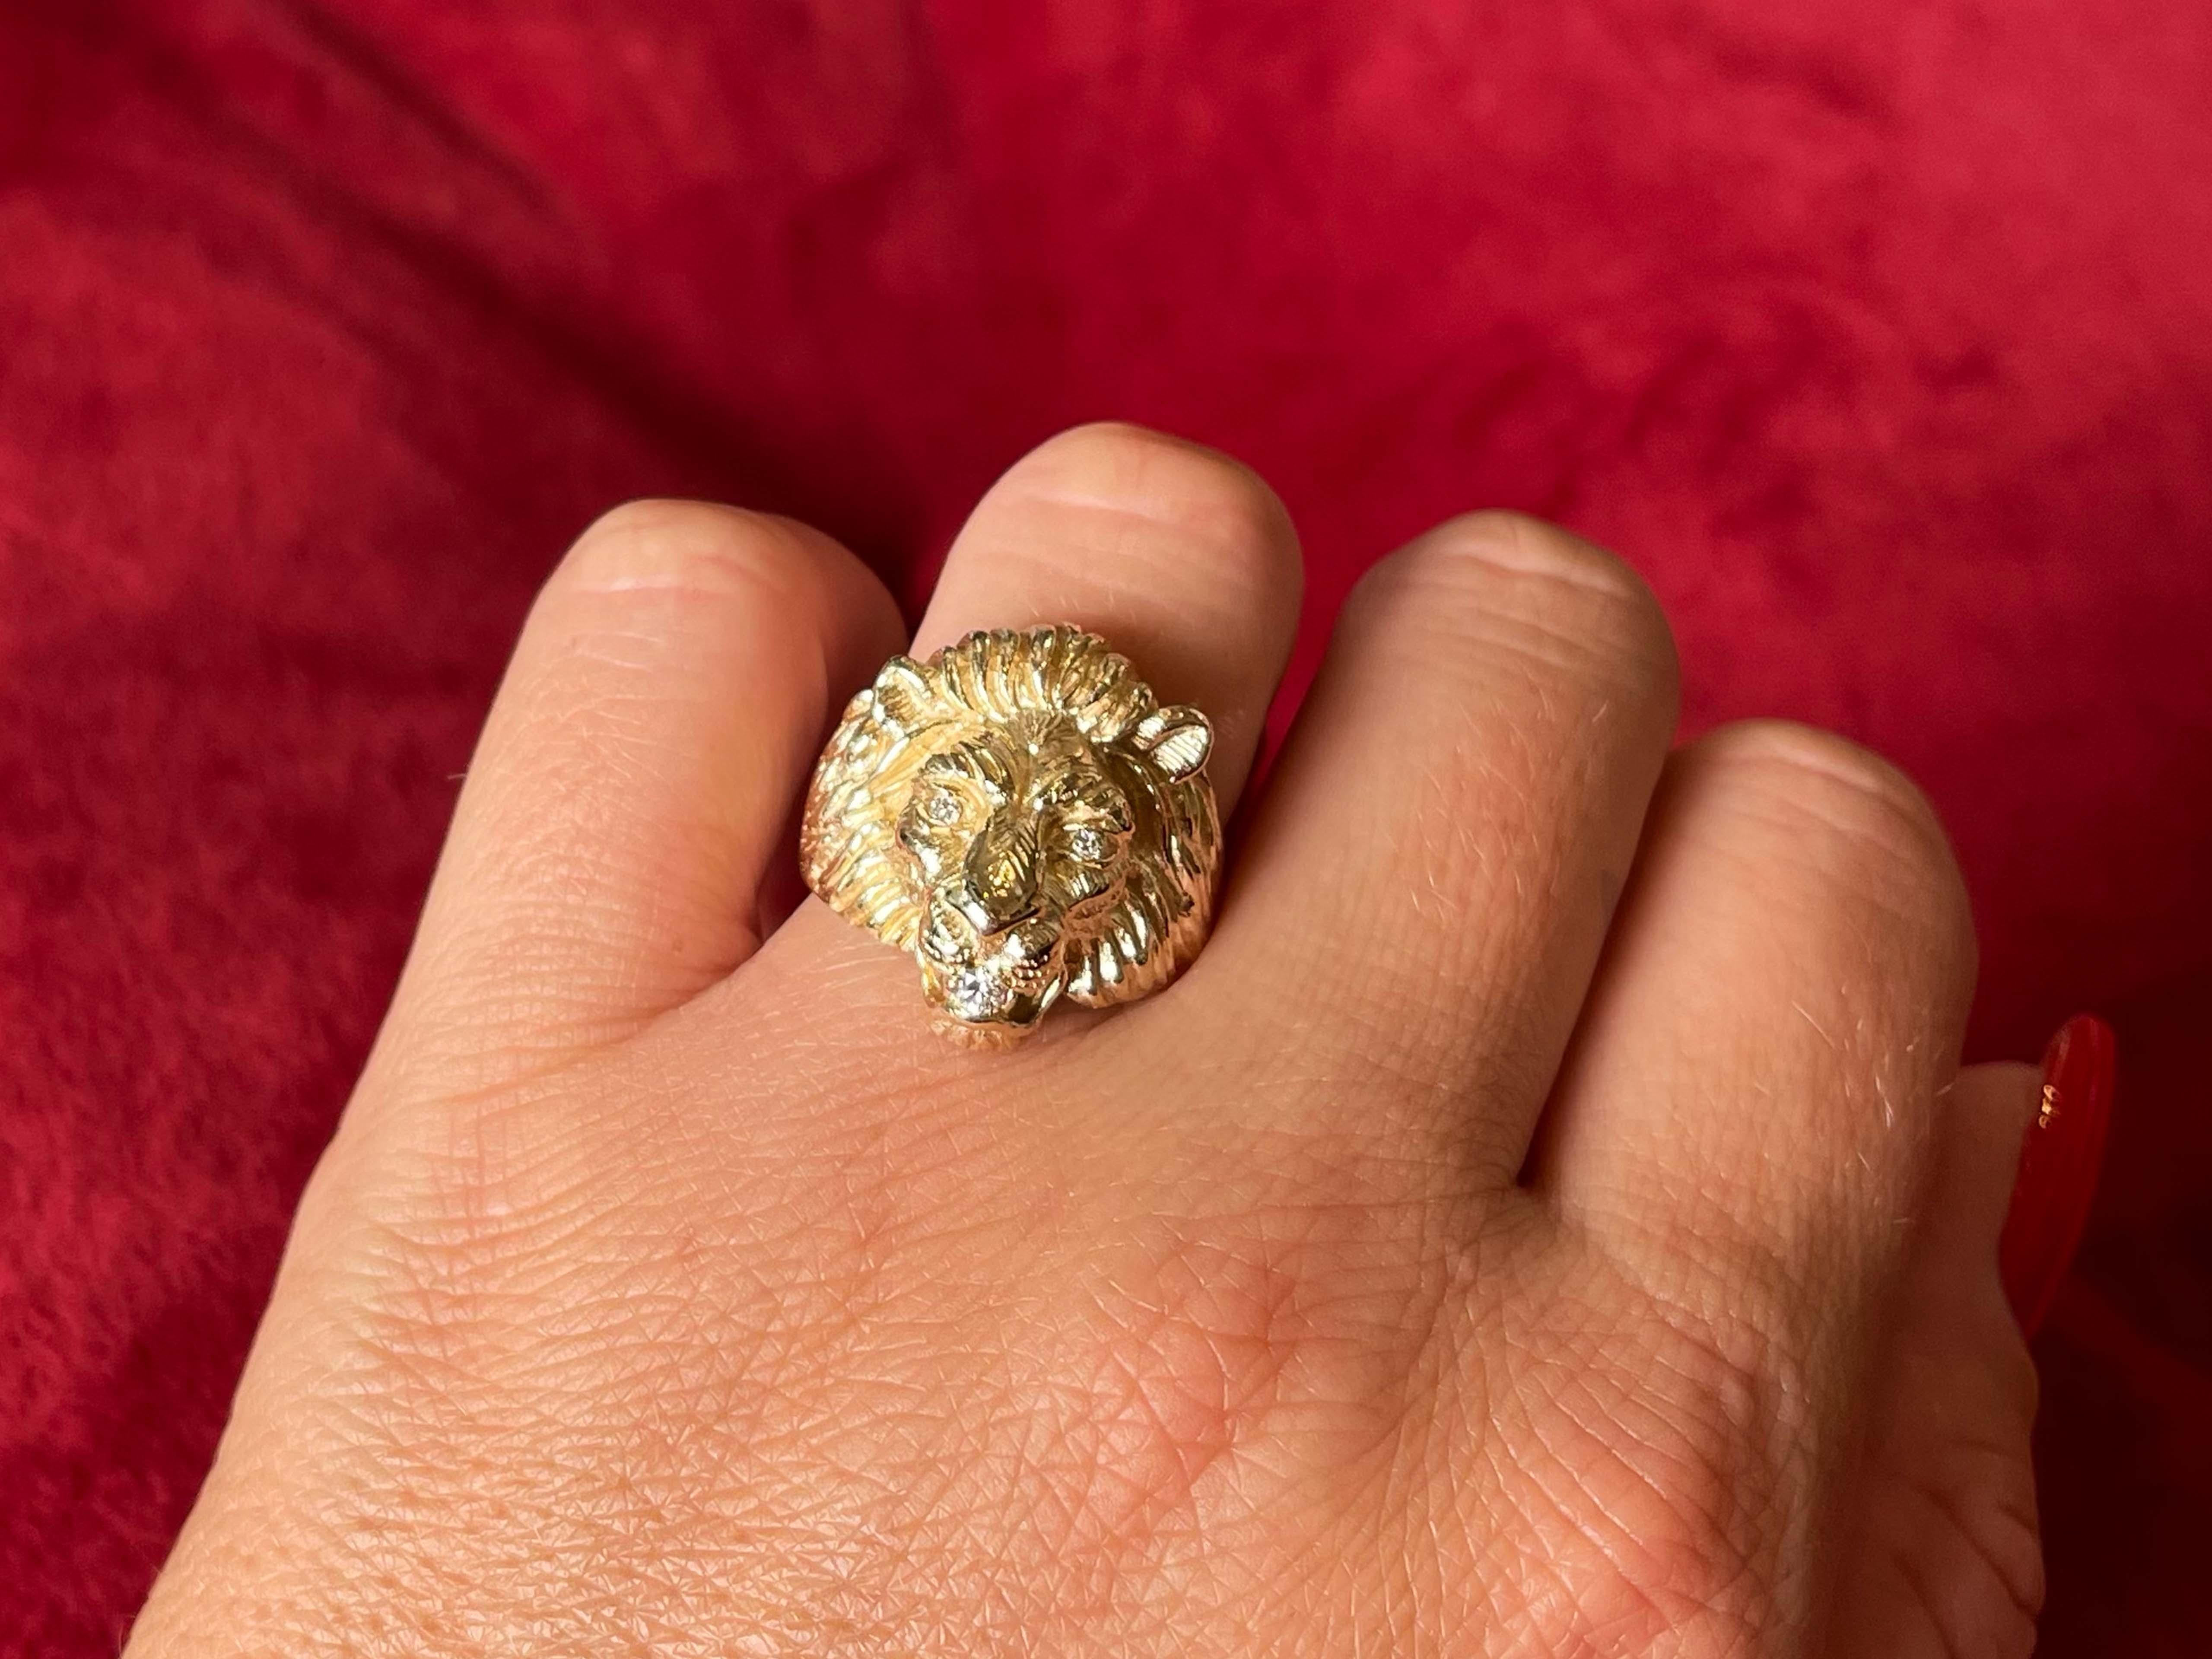 Lion Head Diamond Ring 14K Yellow Gold
​
​Fierce lion head ring with diamond eyes biting a diamond.
​
​Item Specifications:

Metal: 14K Yellow Gold

Total Weight: 11.3 Grams

Ring Size: 7.75
​
​Ring Height: 22 mm tall

Diamond Count: 3 Brilliant cut